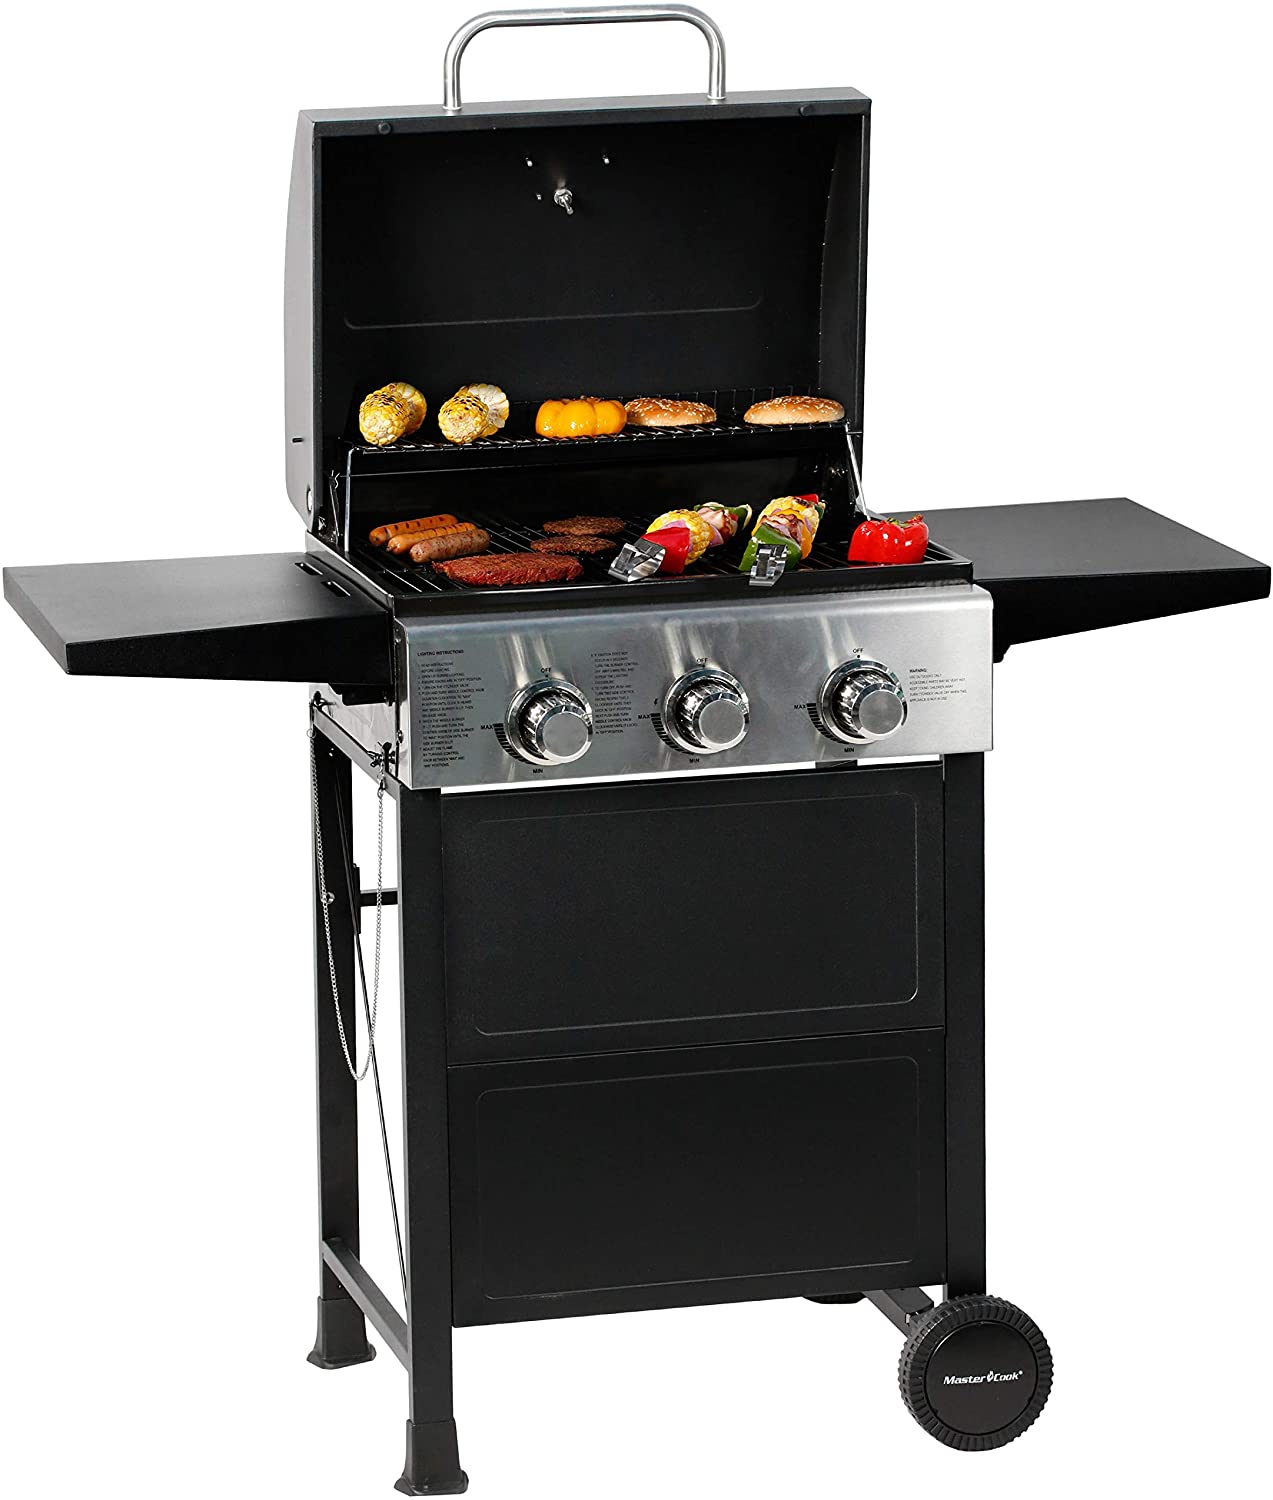 Master Cook 3 Burner BBQ Propane Gas Grill Review